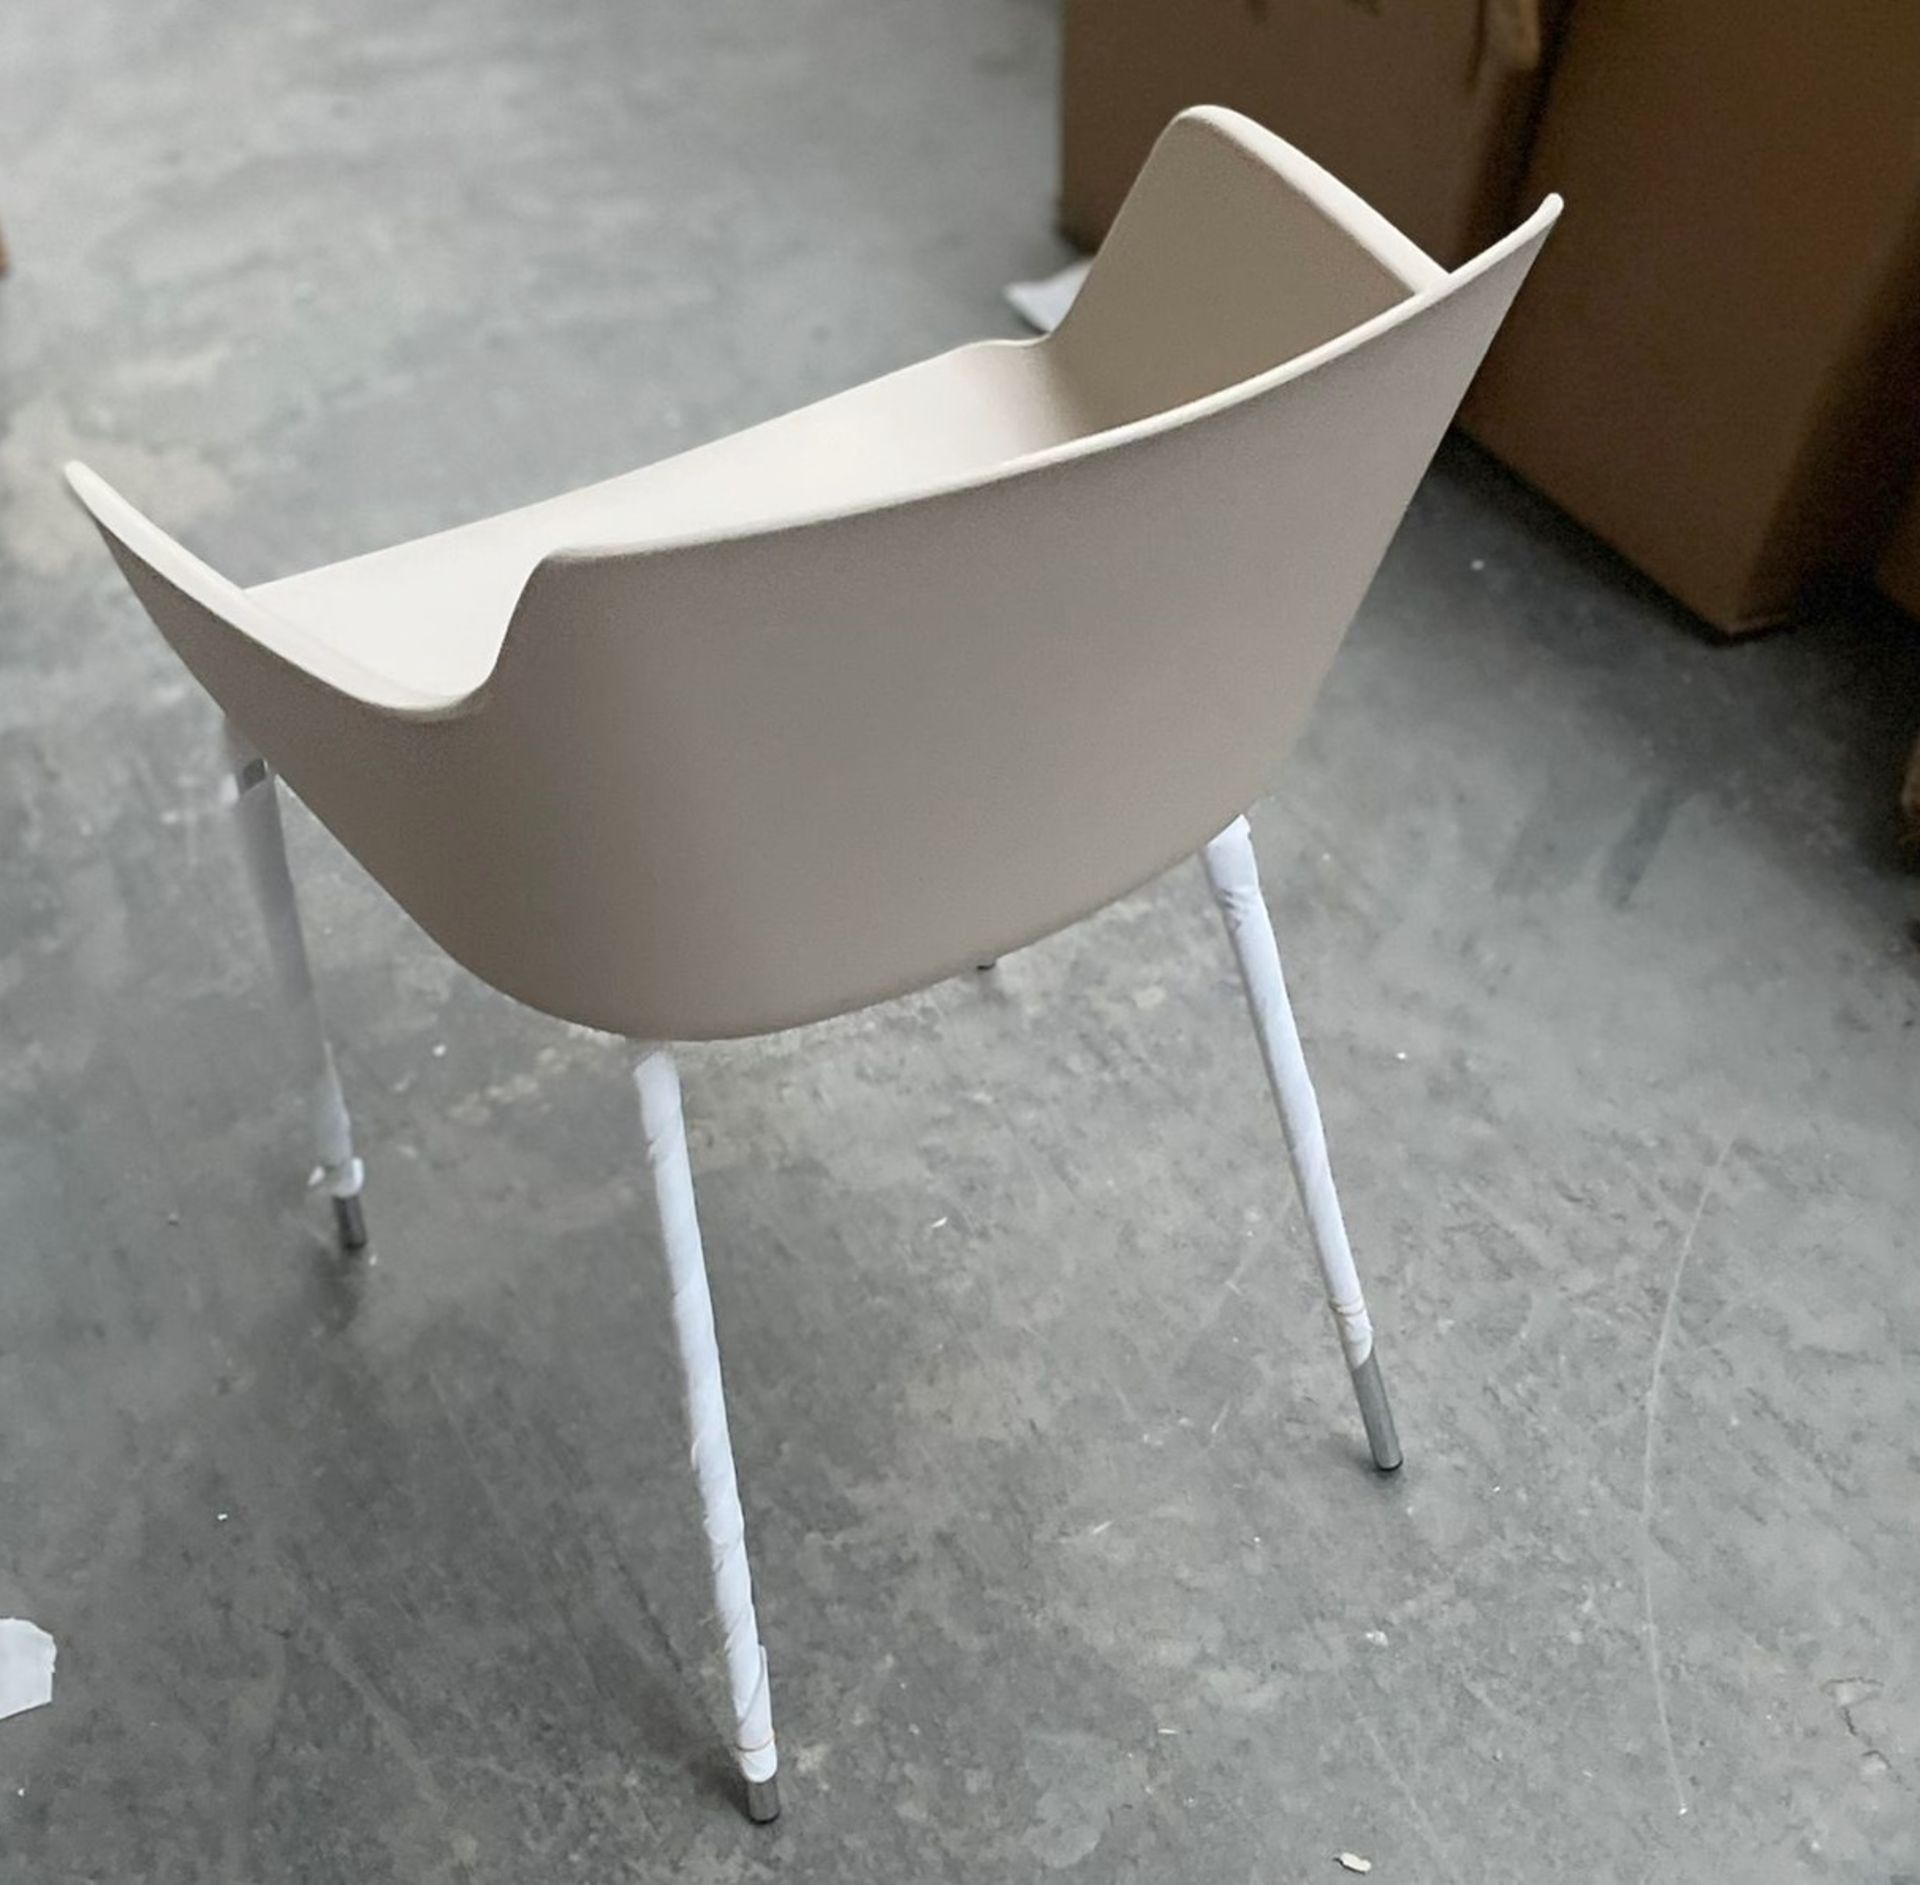 1 x Lullaby Ooland Light Brown Chair With Chrome Base - Dimensions: 57(h) x 52(w) x 52(d) cm - Brand - Image 4 of 5